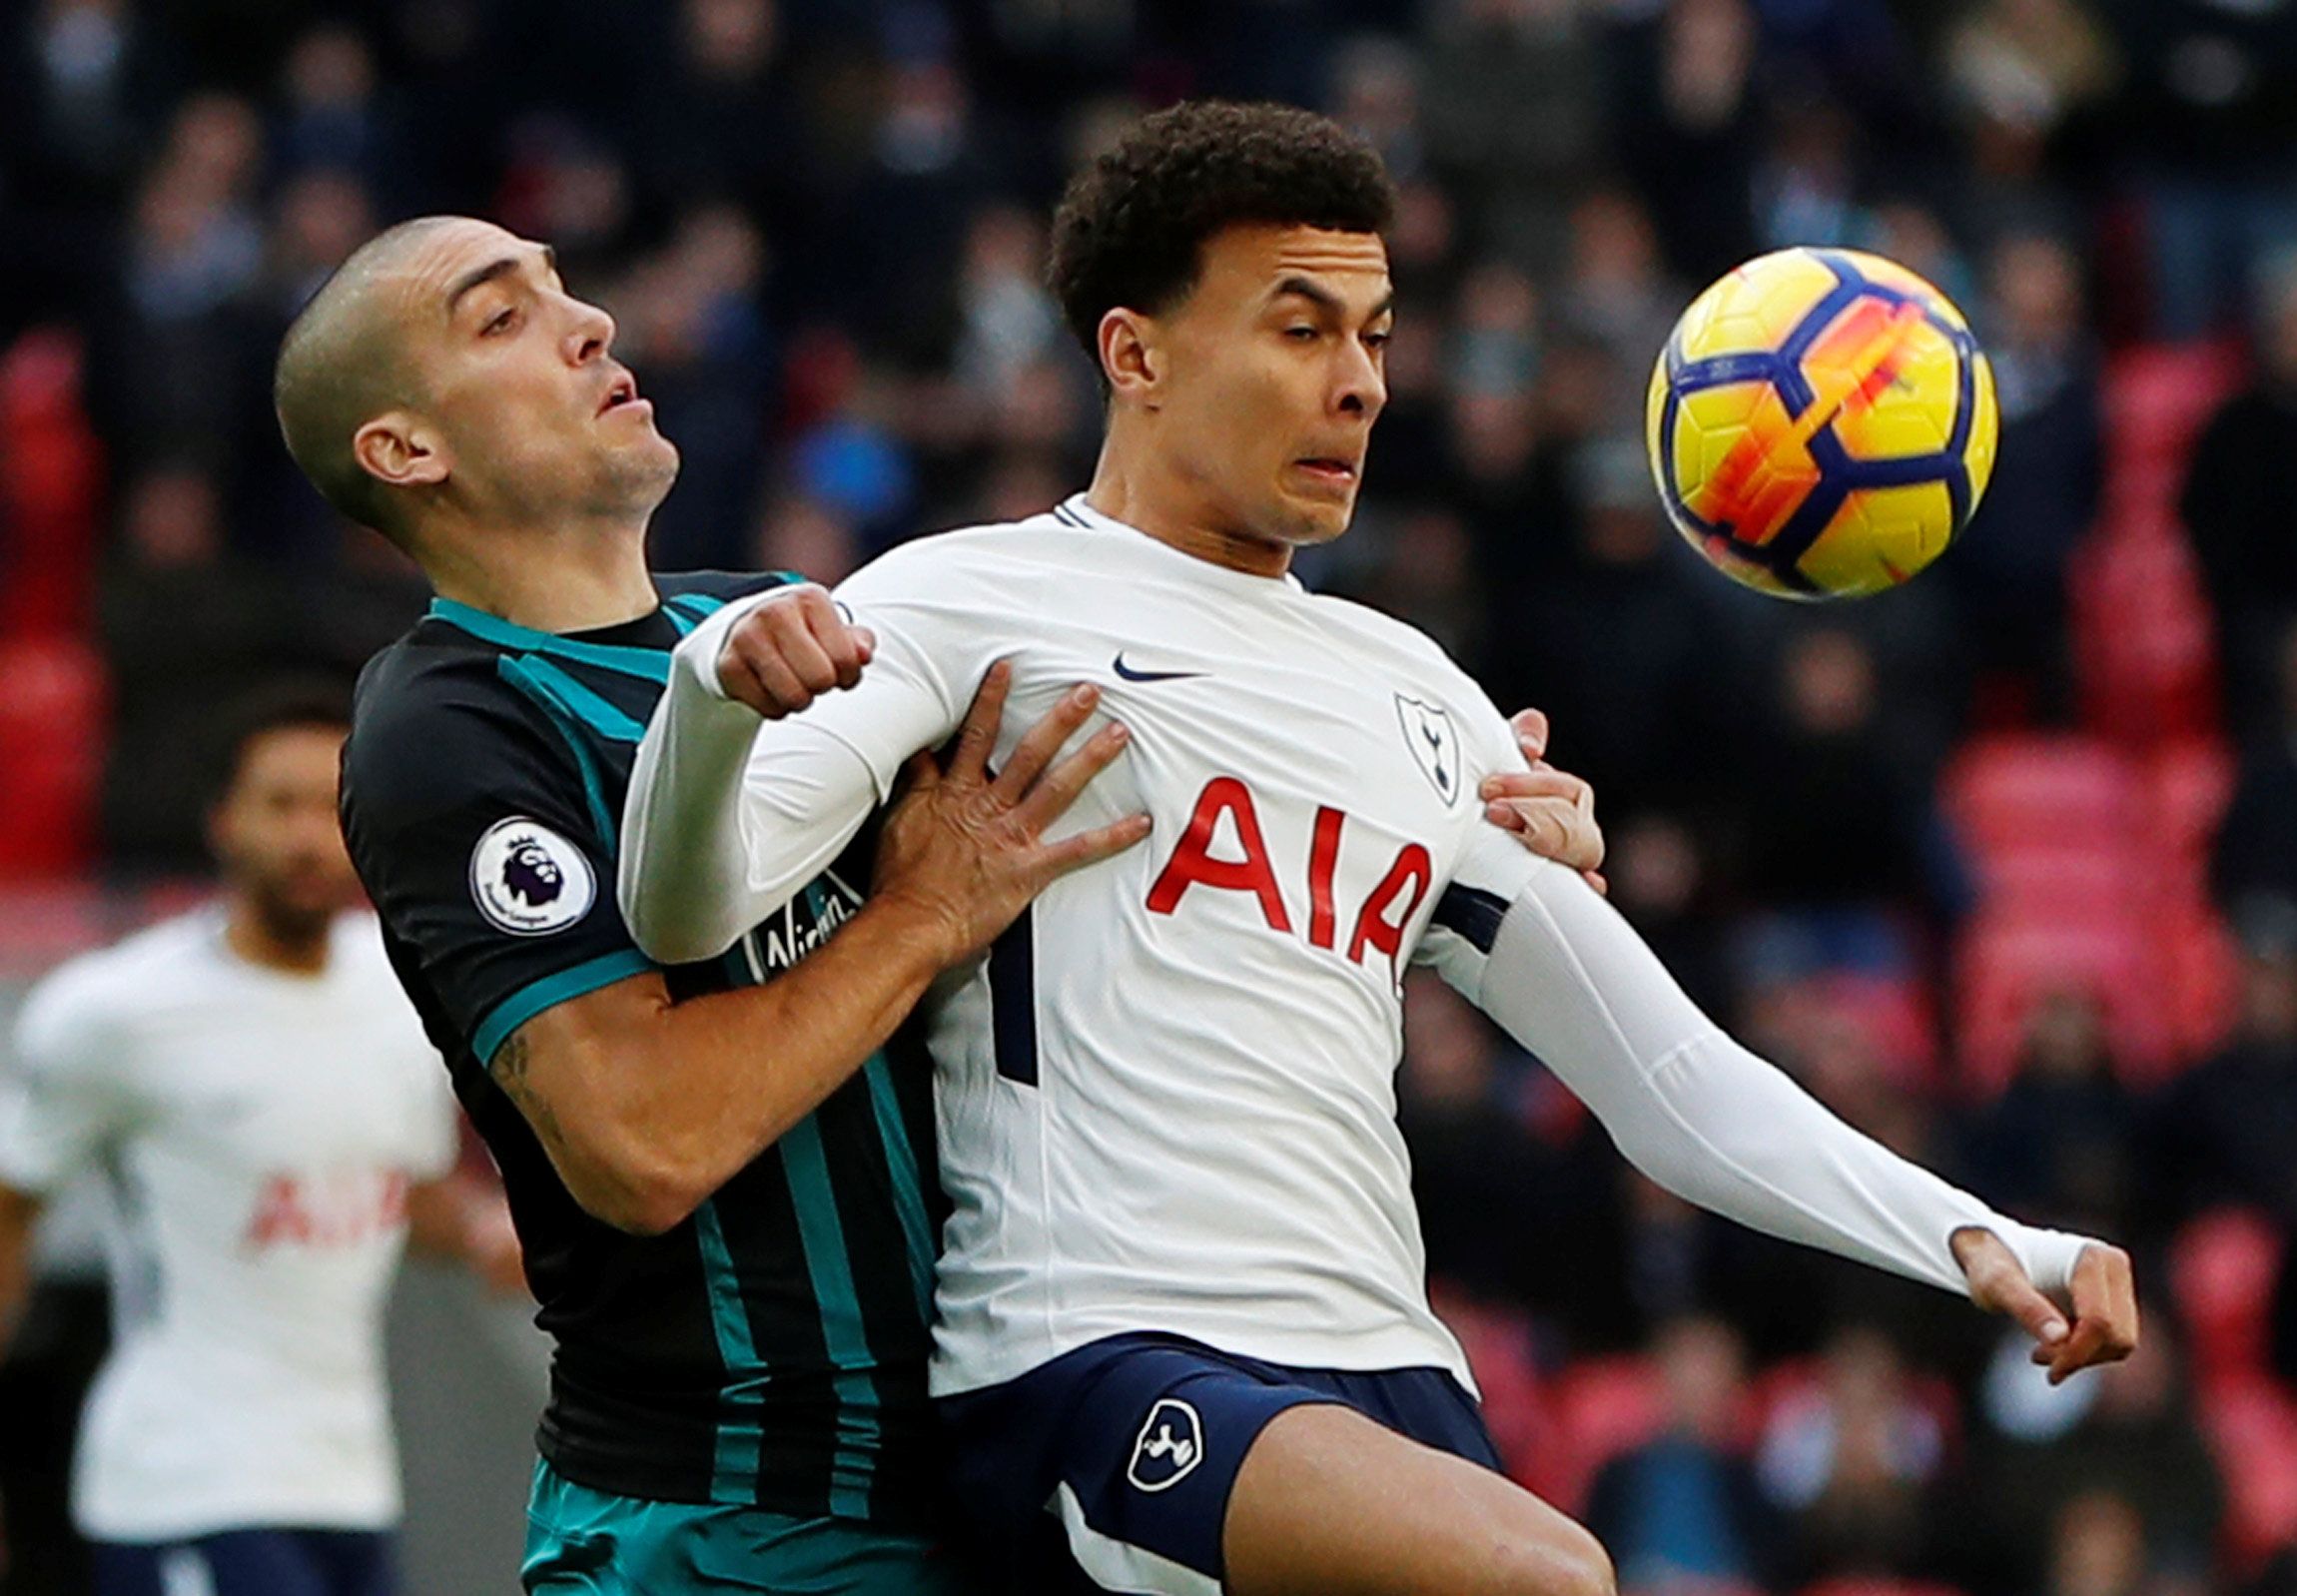 Soccer Football - Premier League - Tottenham Hotspur vs Southampton - Wembley Stadium, London, Britain - December 26, 2017   Tottenham's Dele Alli in action with Southampton's Oriol Romeu    Action Images via Reuters/Paul Childs    EDITORIAL USE ONLY. No use with unauthorized audio, video, data, fixture lists, club/league logos or "live" services. Online in-match use limited to 75 images, no video emulation. No use in betting, games or single club/league/player publications.  Please contact your